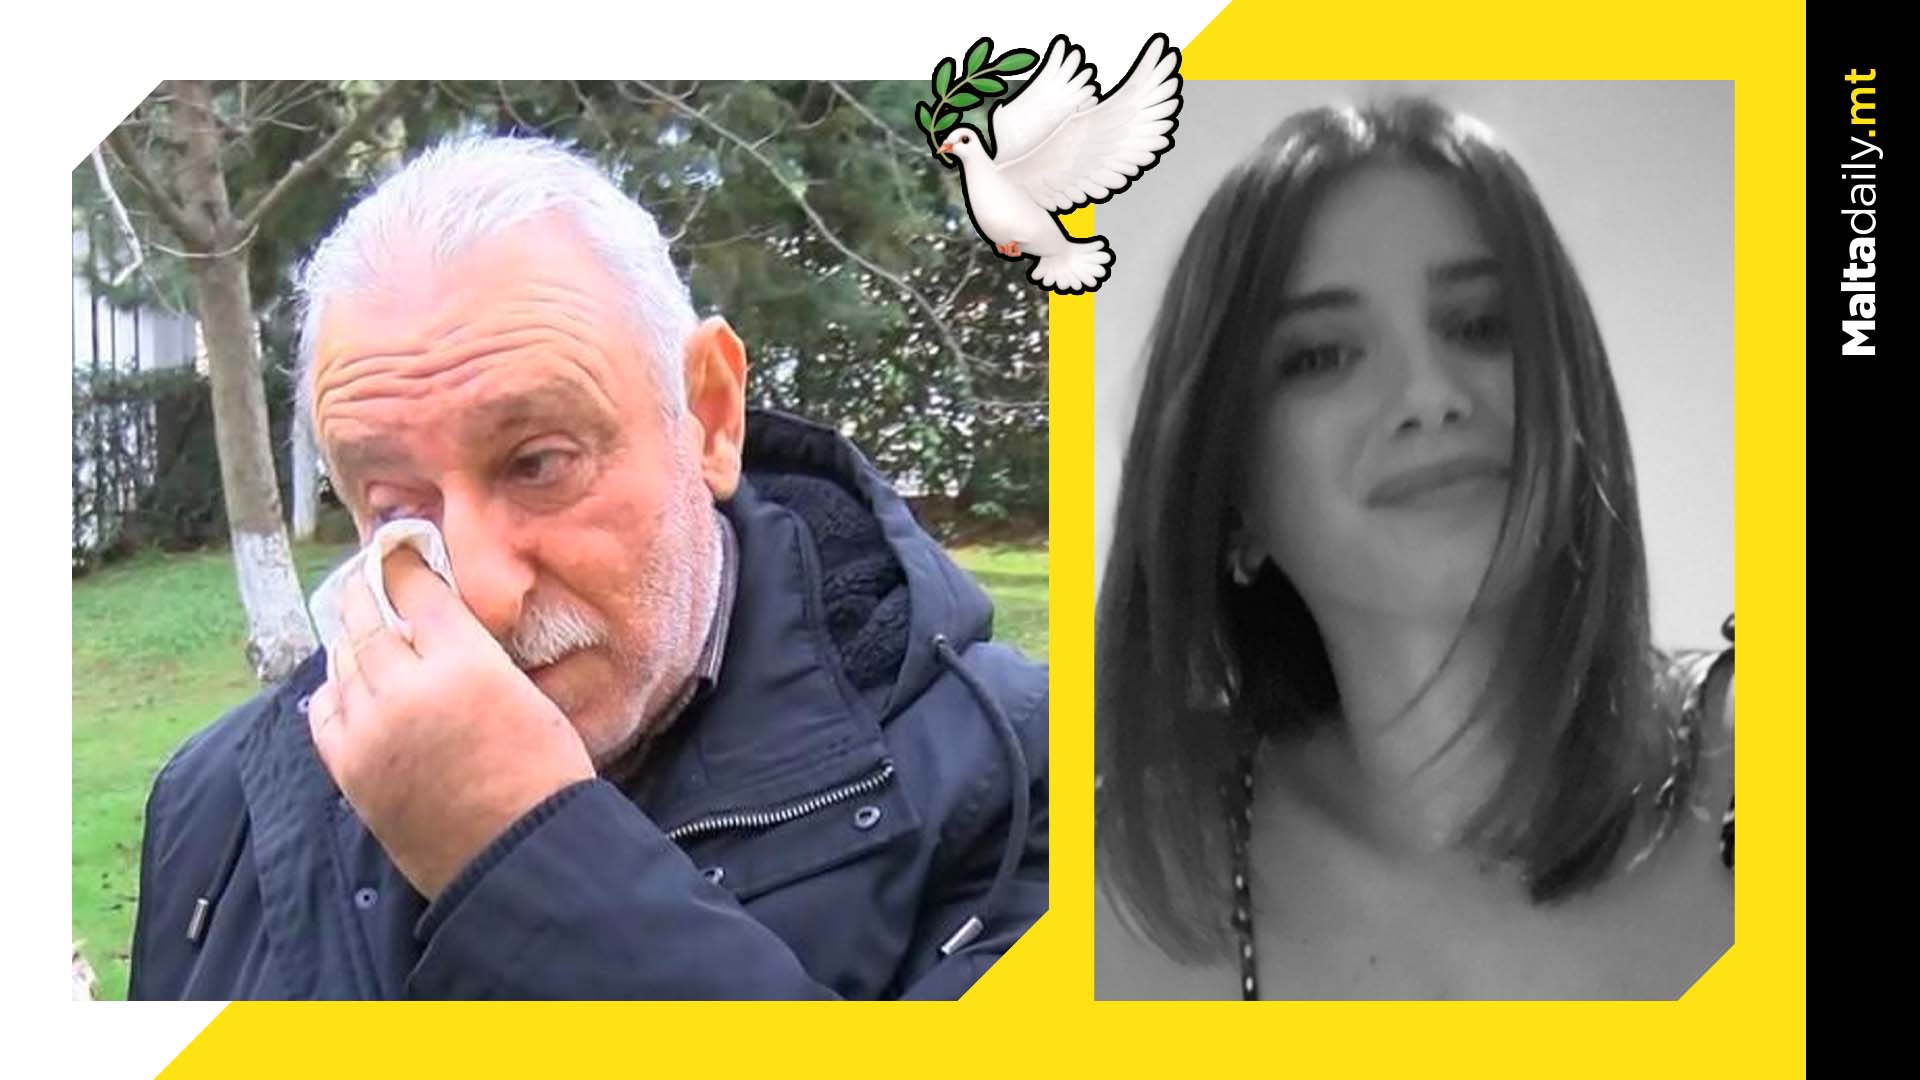 ‘My world collapsed on me: Pelin Kaya’s father speaks out